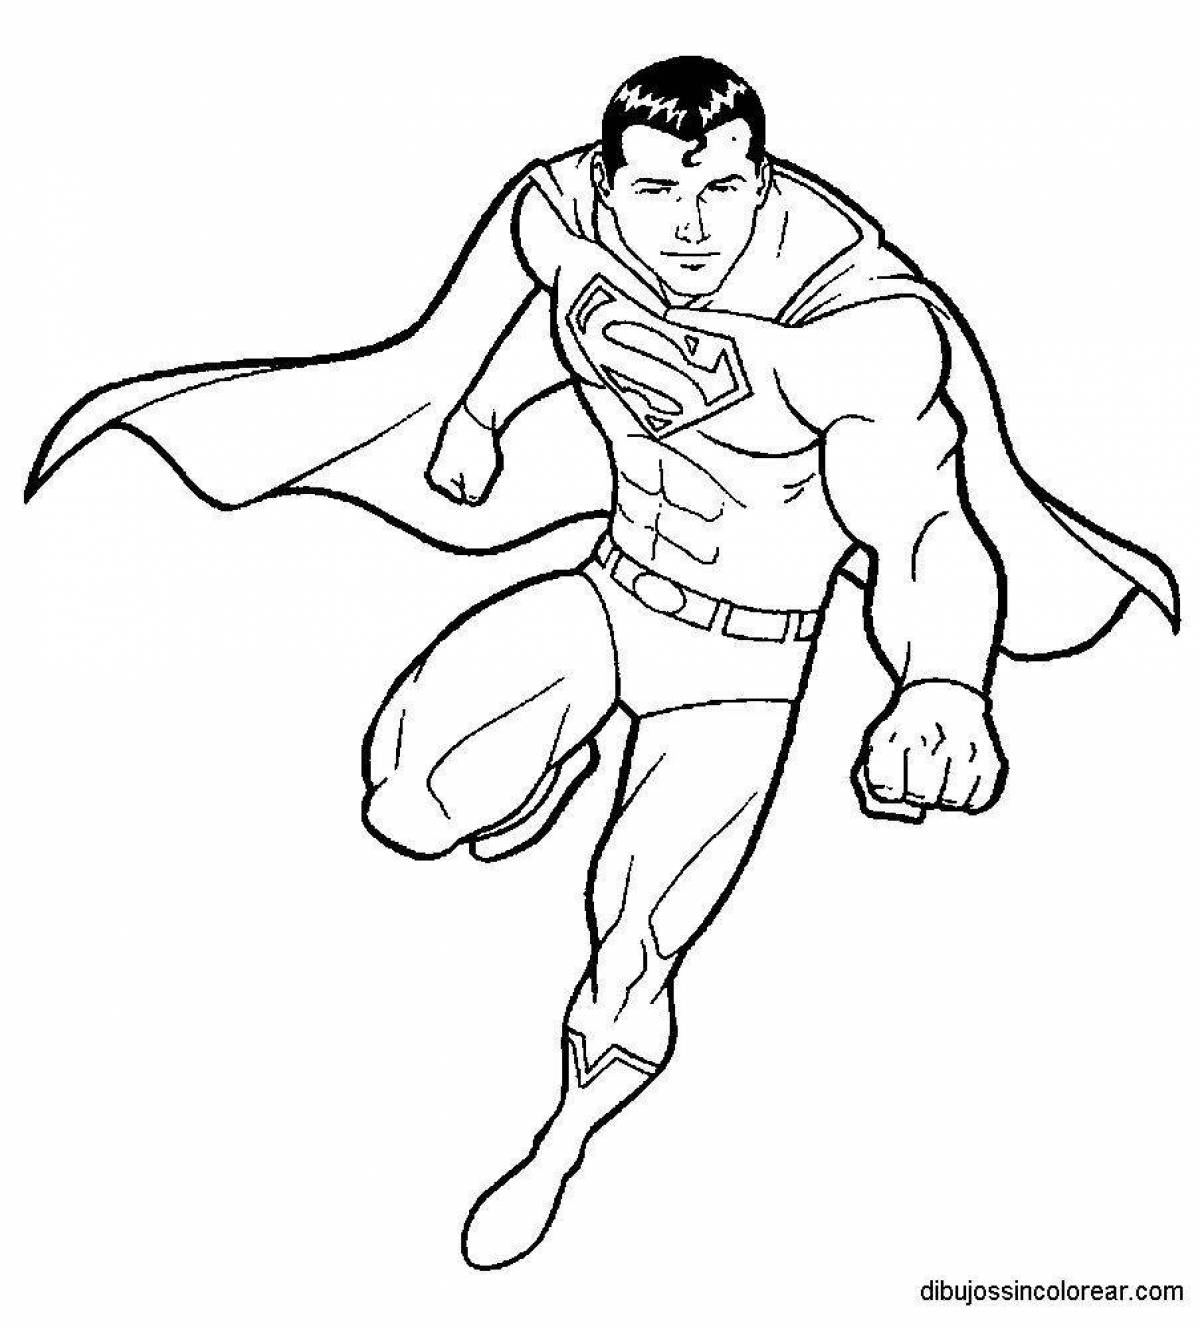 Superman fun coloring book for kids 3-4 years old